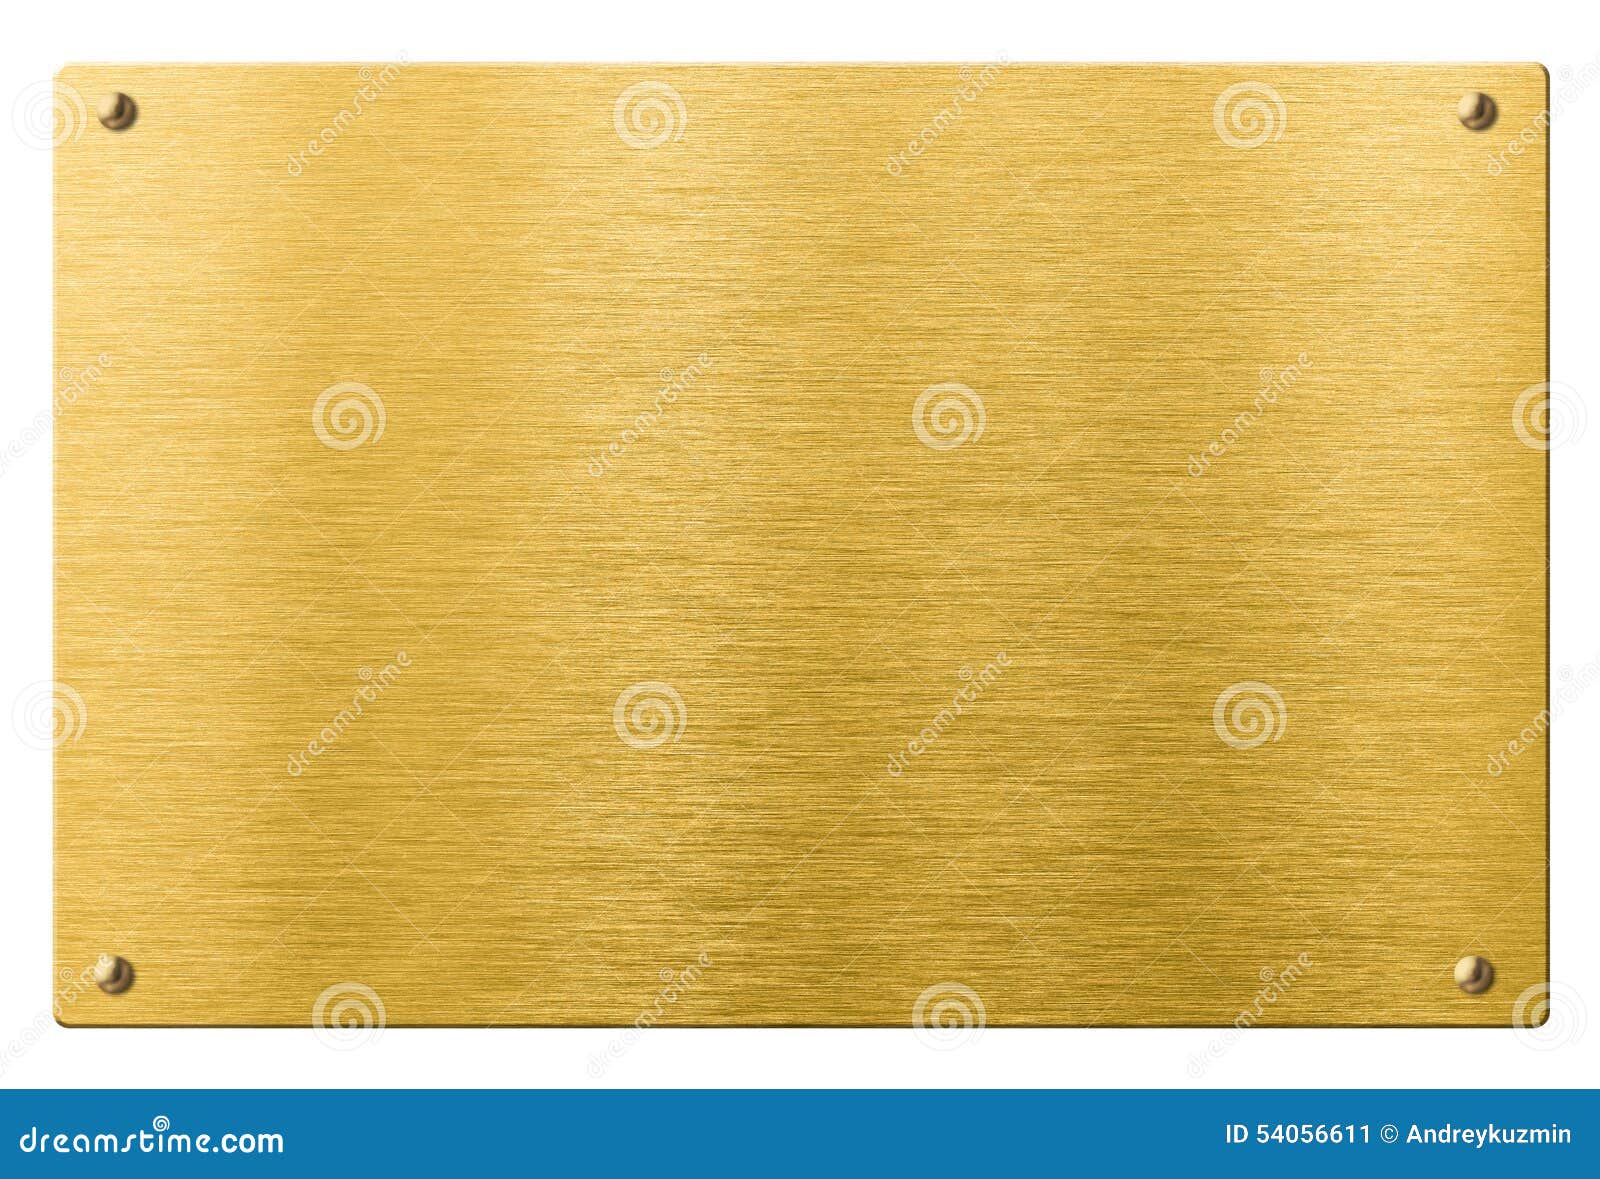 gold or brass metal plate with rivets 